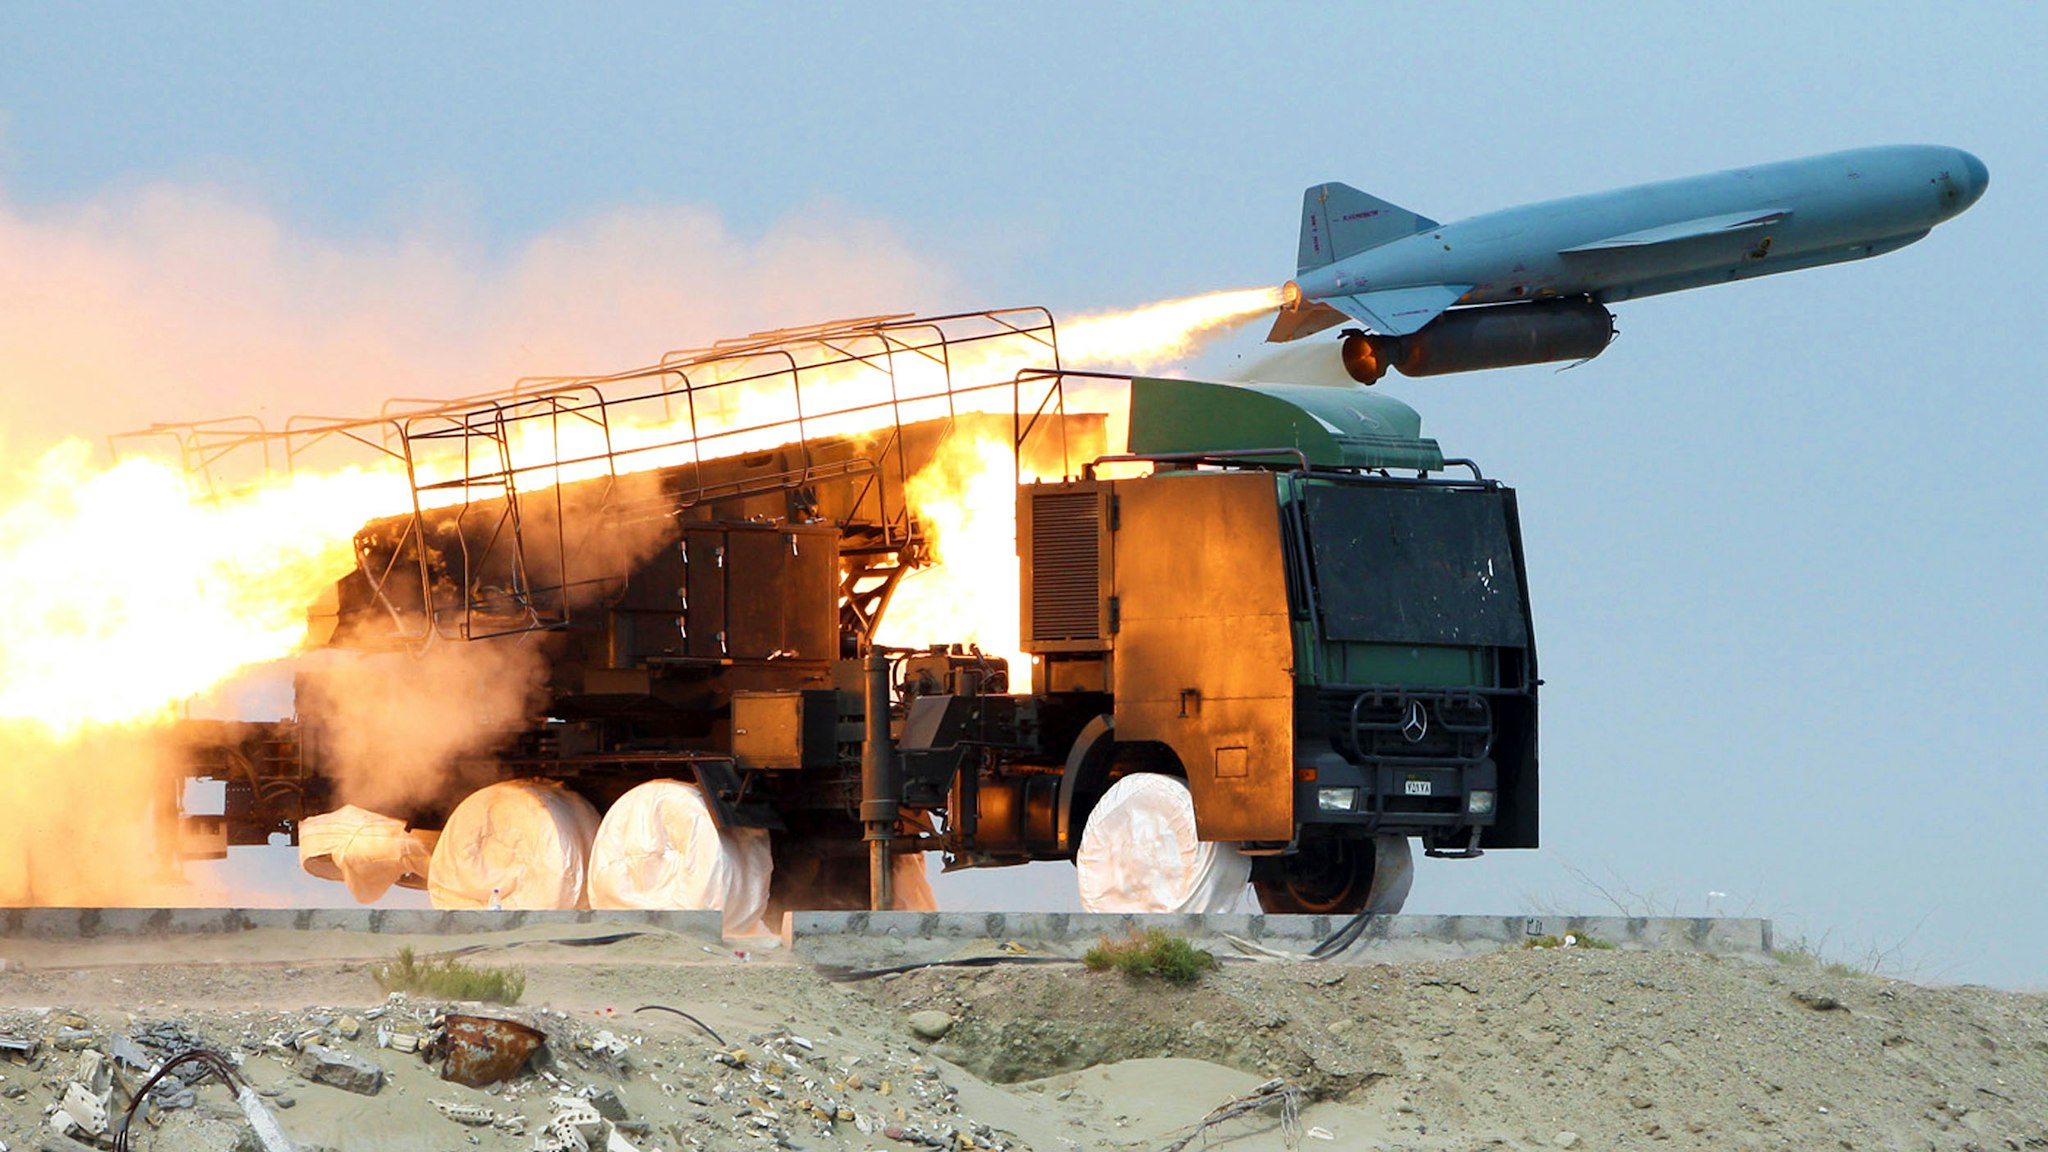 An Iranian Saeqeh missile is launched during war games on April 25, 2010 in southern Iran, near the Strait of Hormuz, the narrow strategically located waterway through which 40 percent of world's seaborne oil supplies pass. Iran's elite Revolutionary Guards fired five missiles as part of an ongoing three-day military drill, with Fars news agency naming two of those tested as the Noor (Light) and Nasr (Victory) missiles. It said a third, having a range of over 300 kilometres was also fired, but did not name it. The Islamic republic's missile programme has raised concerns in the West which is already at loggerheads with Tehran over its controversial nuclear project.